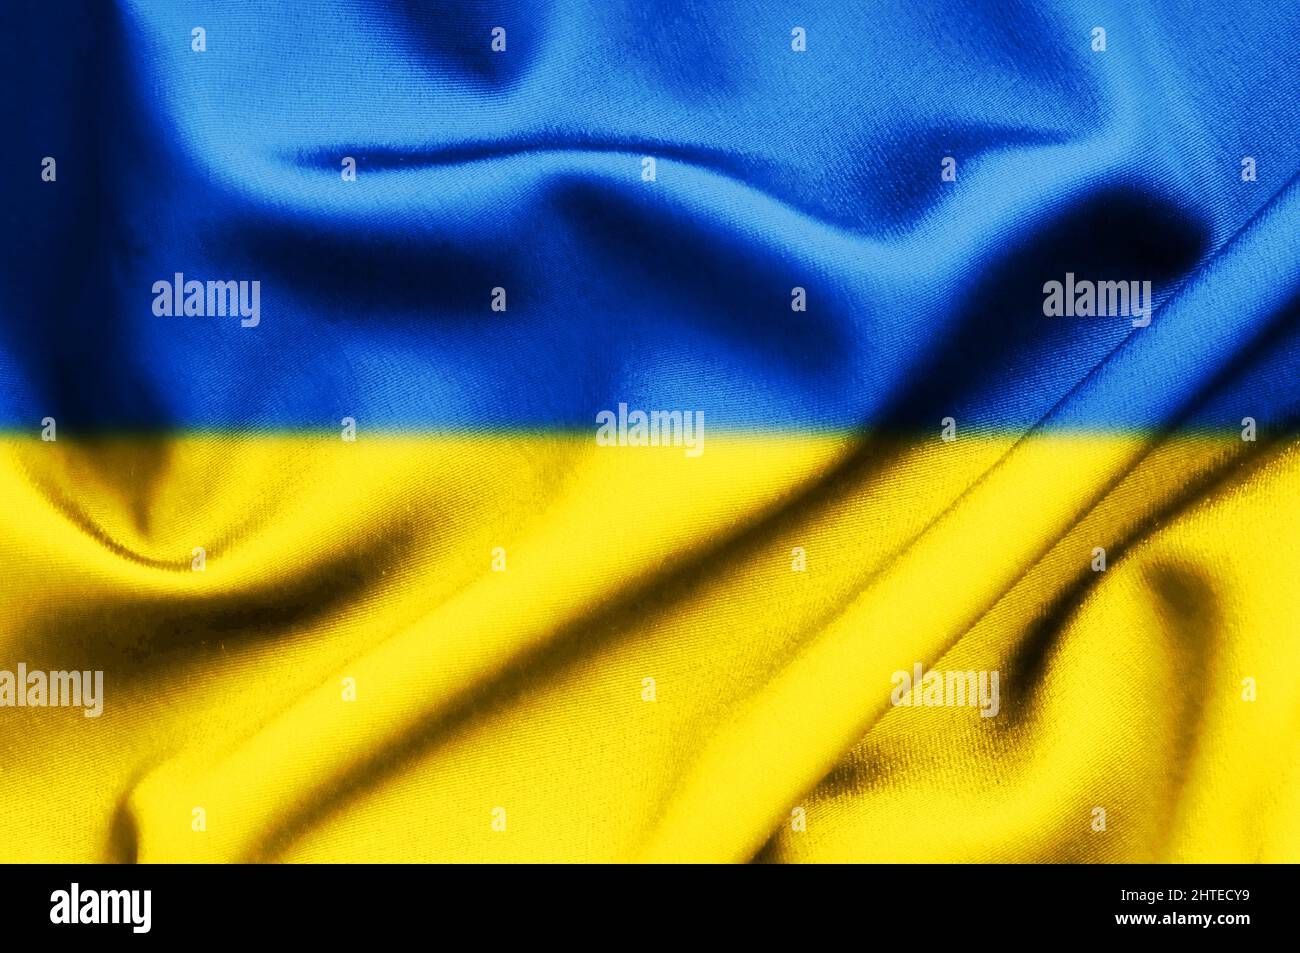 Ukrainian yellow and blue flag textile background. Ukraine war, national patriotic support and pride Stock Photo